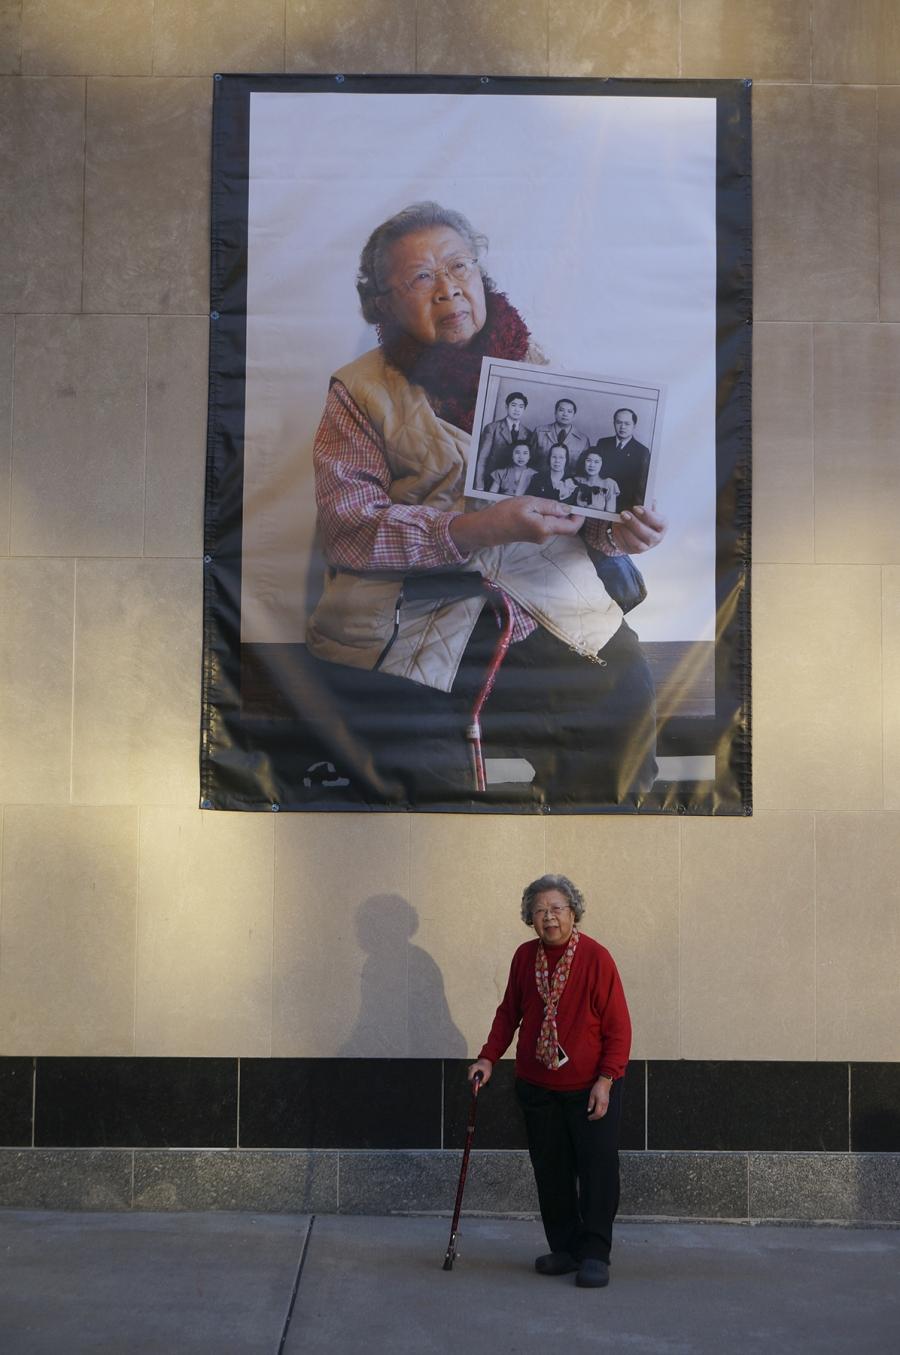 A woman stands in front of her portrait which hangs large on the side of a building